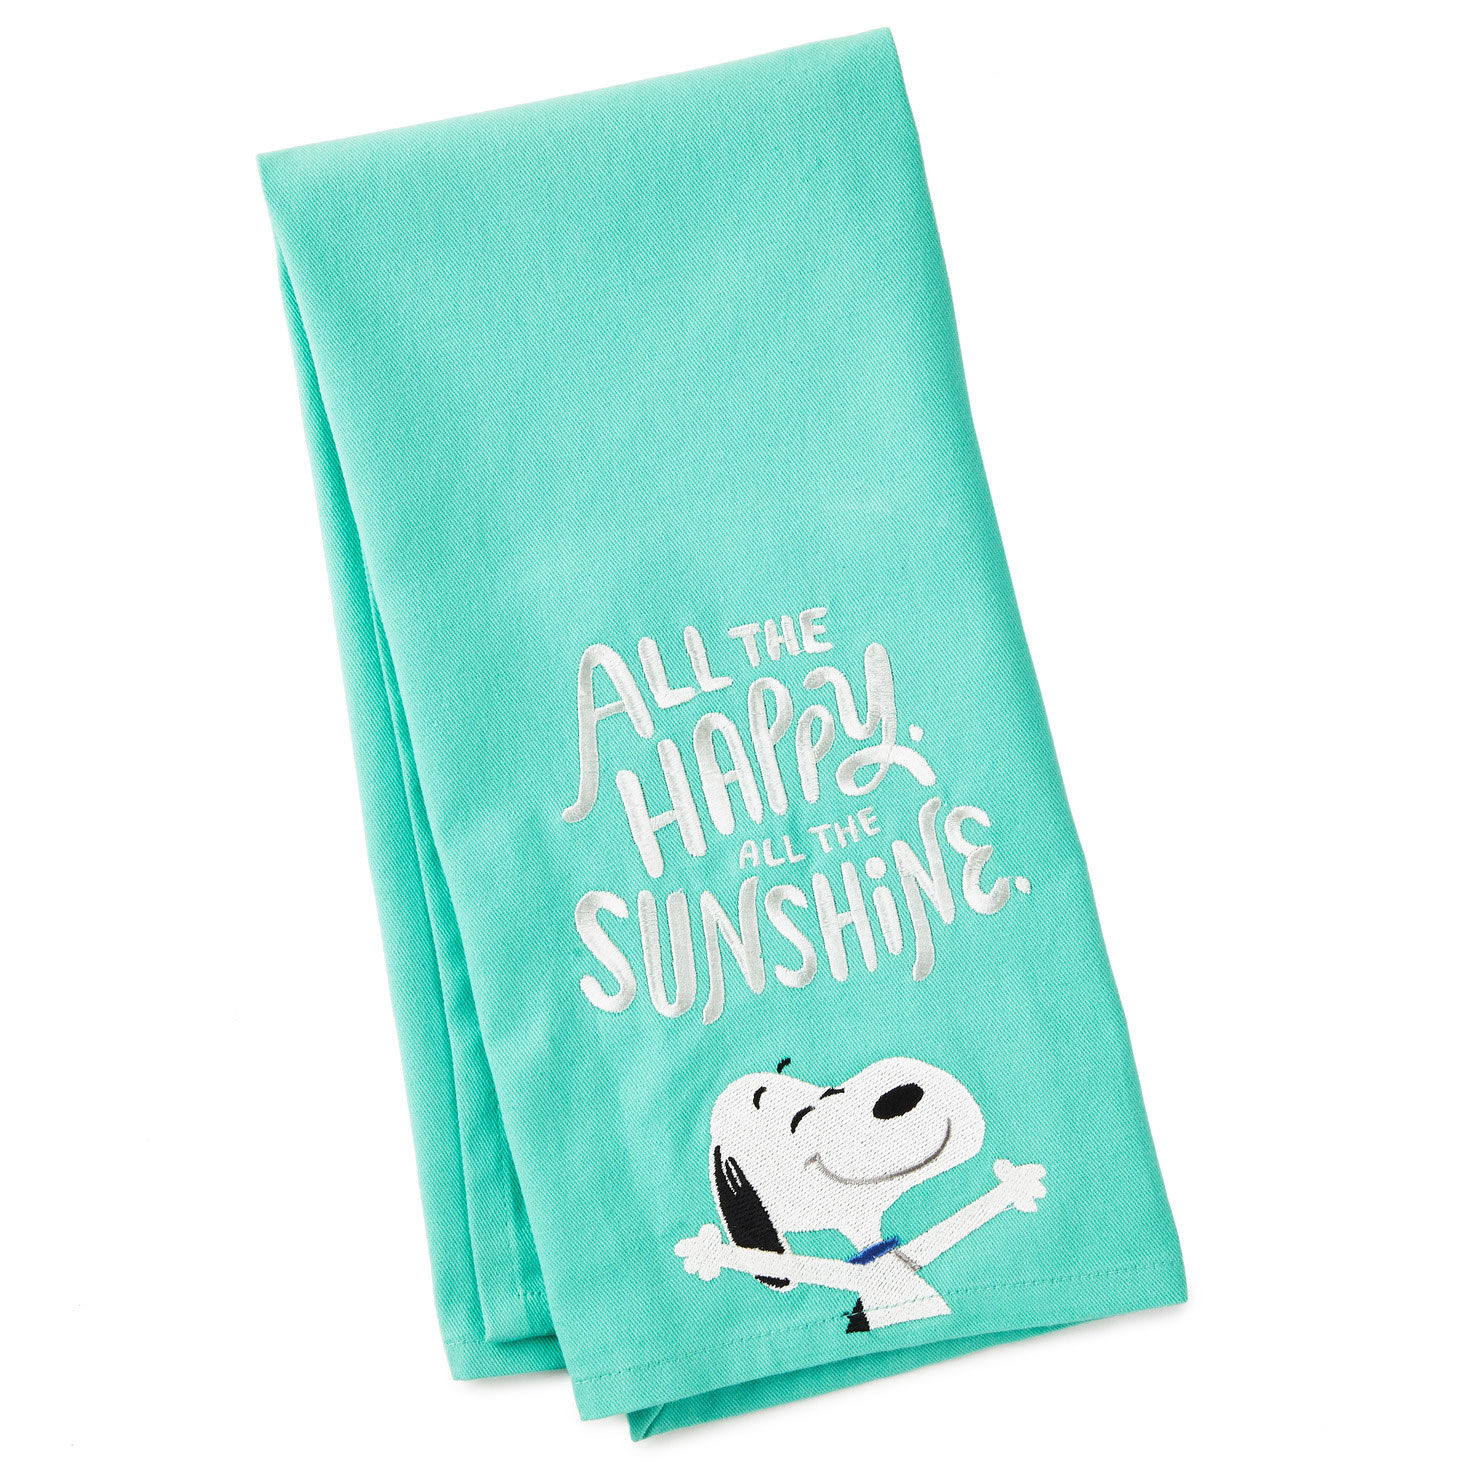 https://www.hallmark.com/dw/image/v2/AALB_PRD/on/demandware.static/-/Sites-hallmark-master/default/dw8249ac59/images/finished-goods/products/1PAJ3538/Peanuts-All-the-Happy-Snoopy-Teal-Kitchen-Towel_1PAJ3538_01.jpg?sfrm=jpg